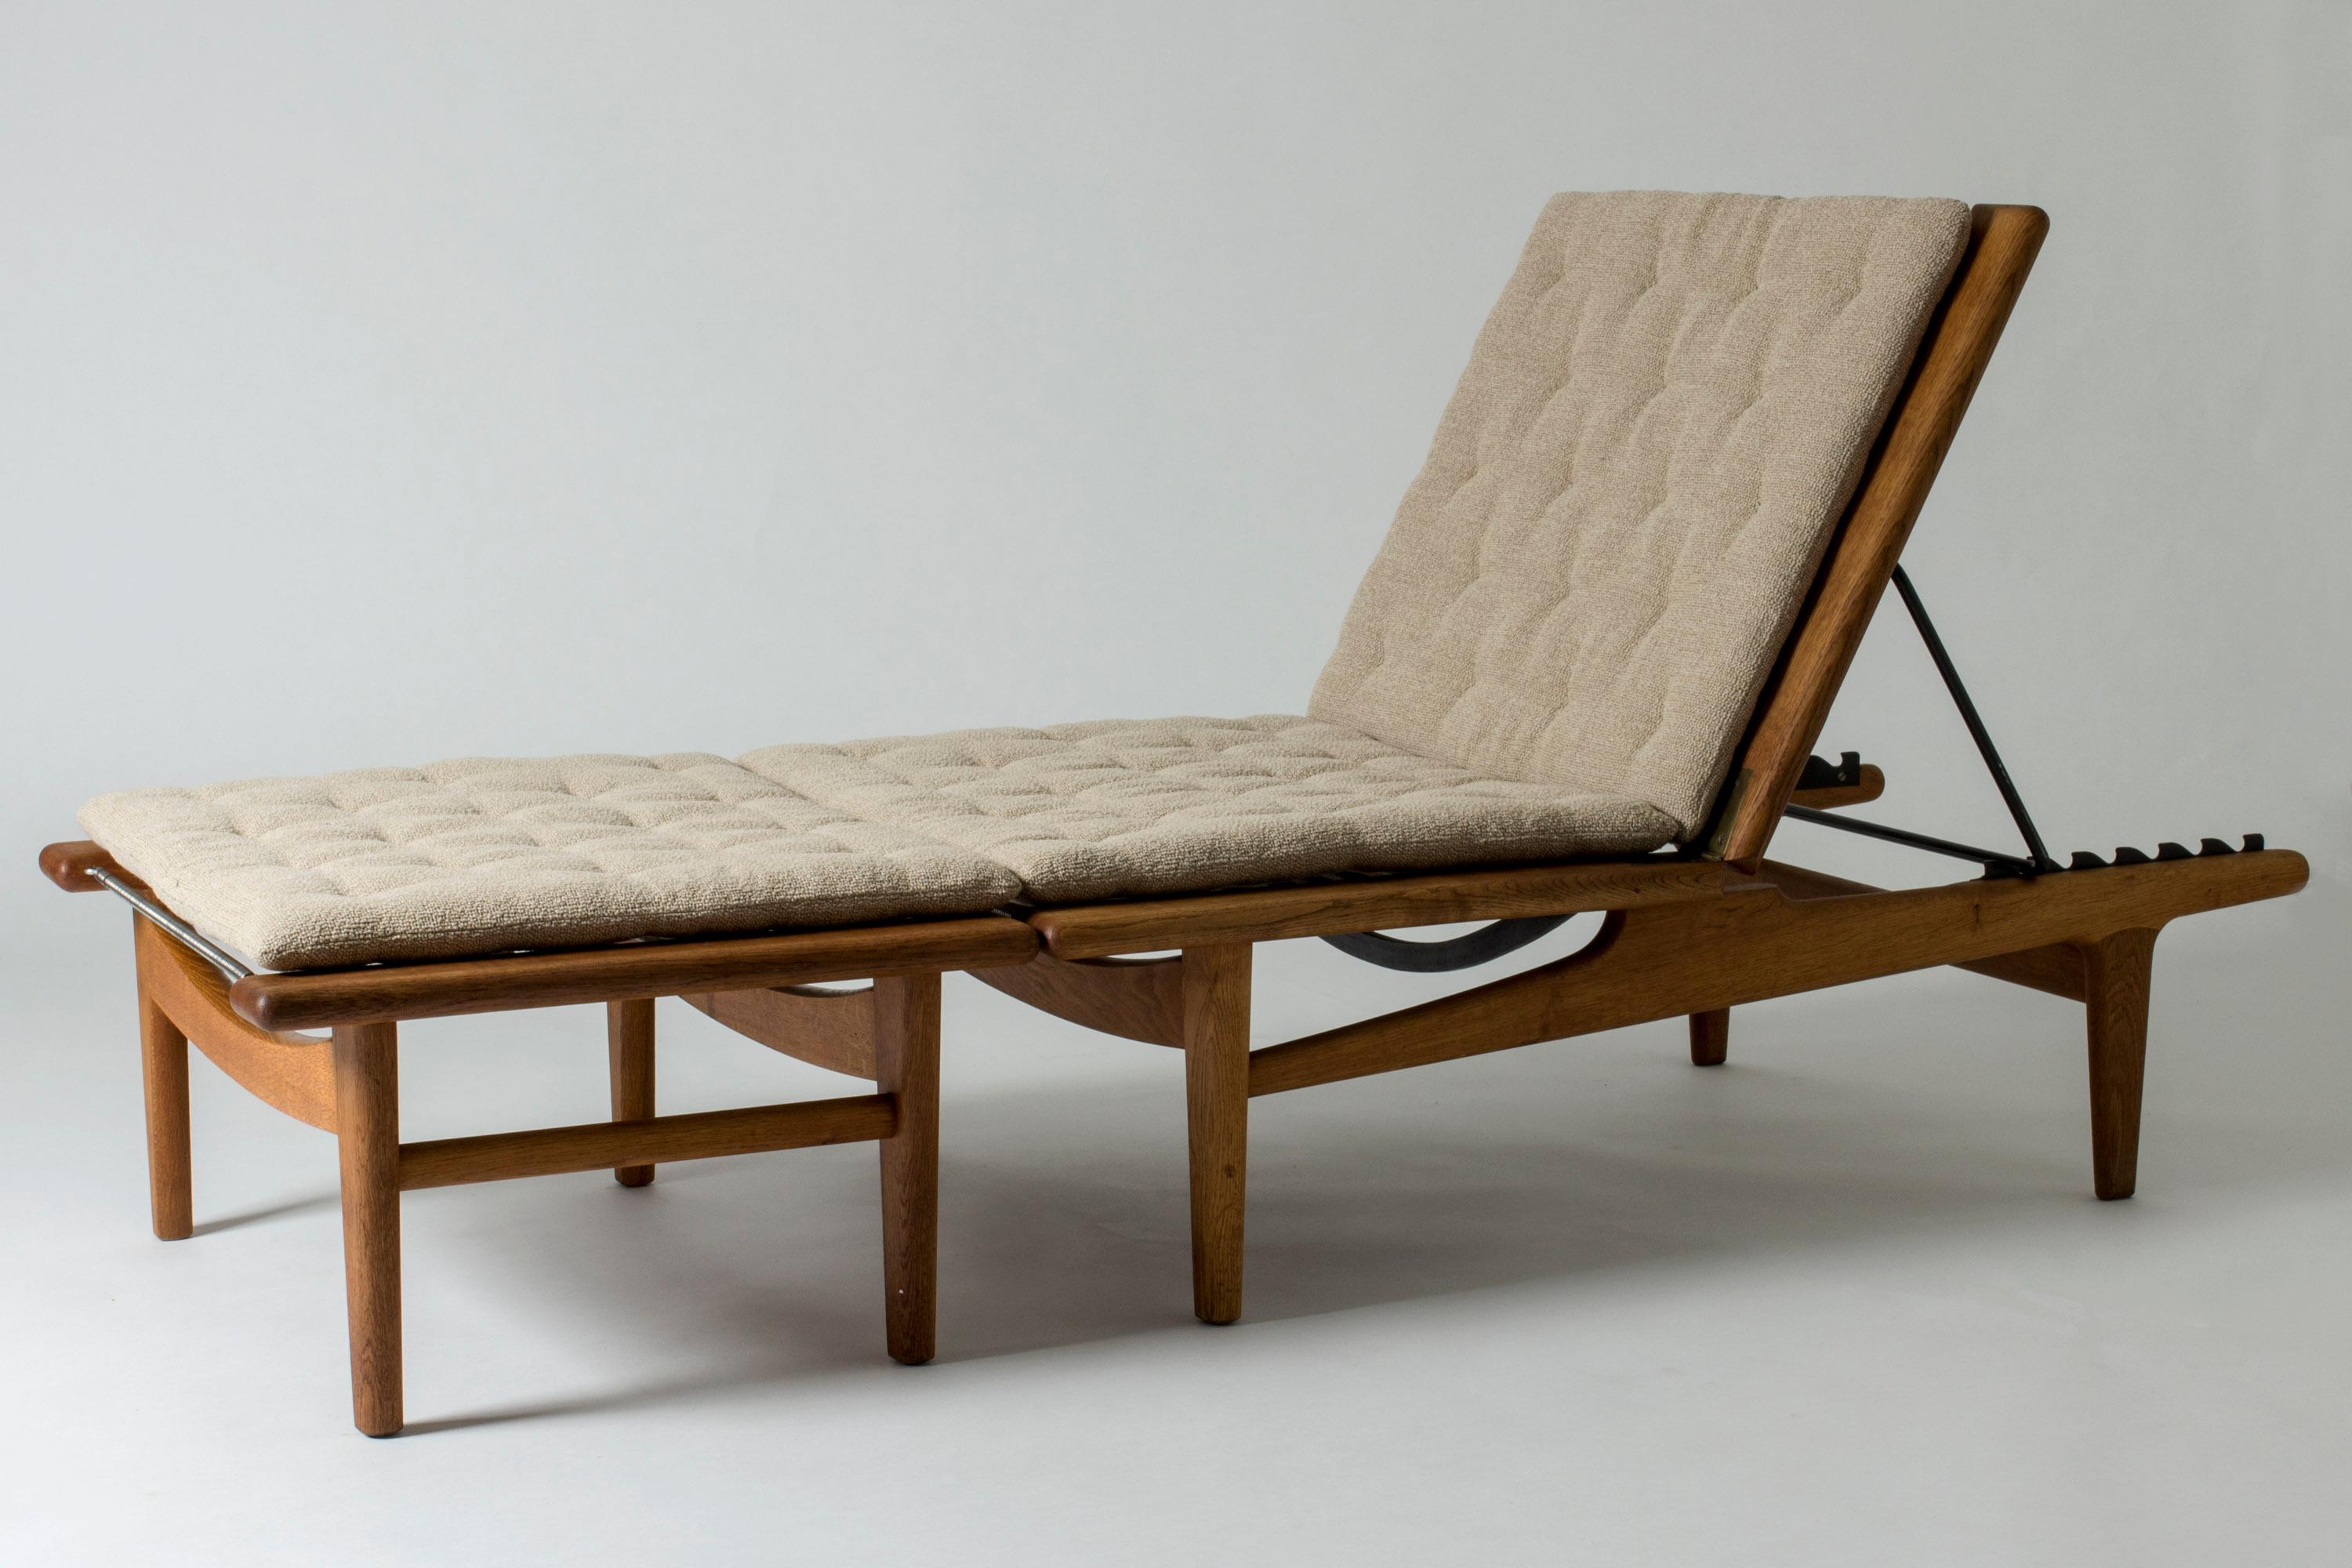 Very cool lounge chair with footstool by Hans J. Wegner. Can be set in a flat position and turned into a daybed. Made from oak with beautiful woodgrain, with large, decorative brass hinges. Loose cushions.

Size: Height 38 cm (folded), 88 cm (set